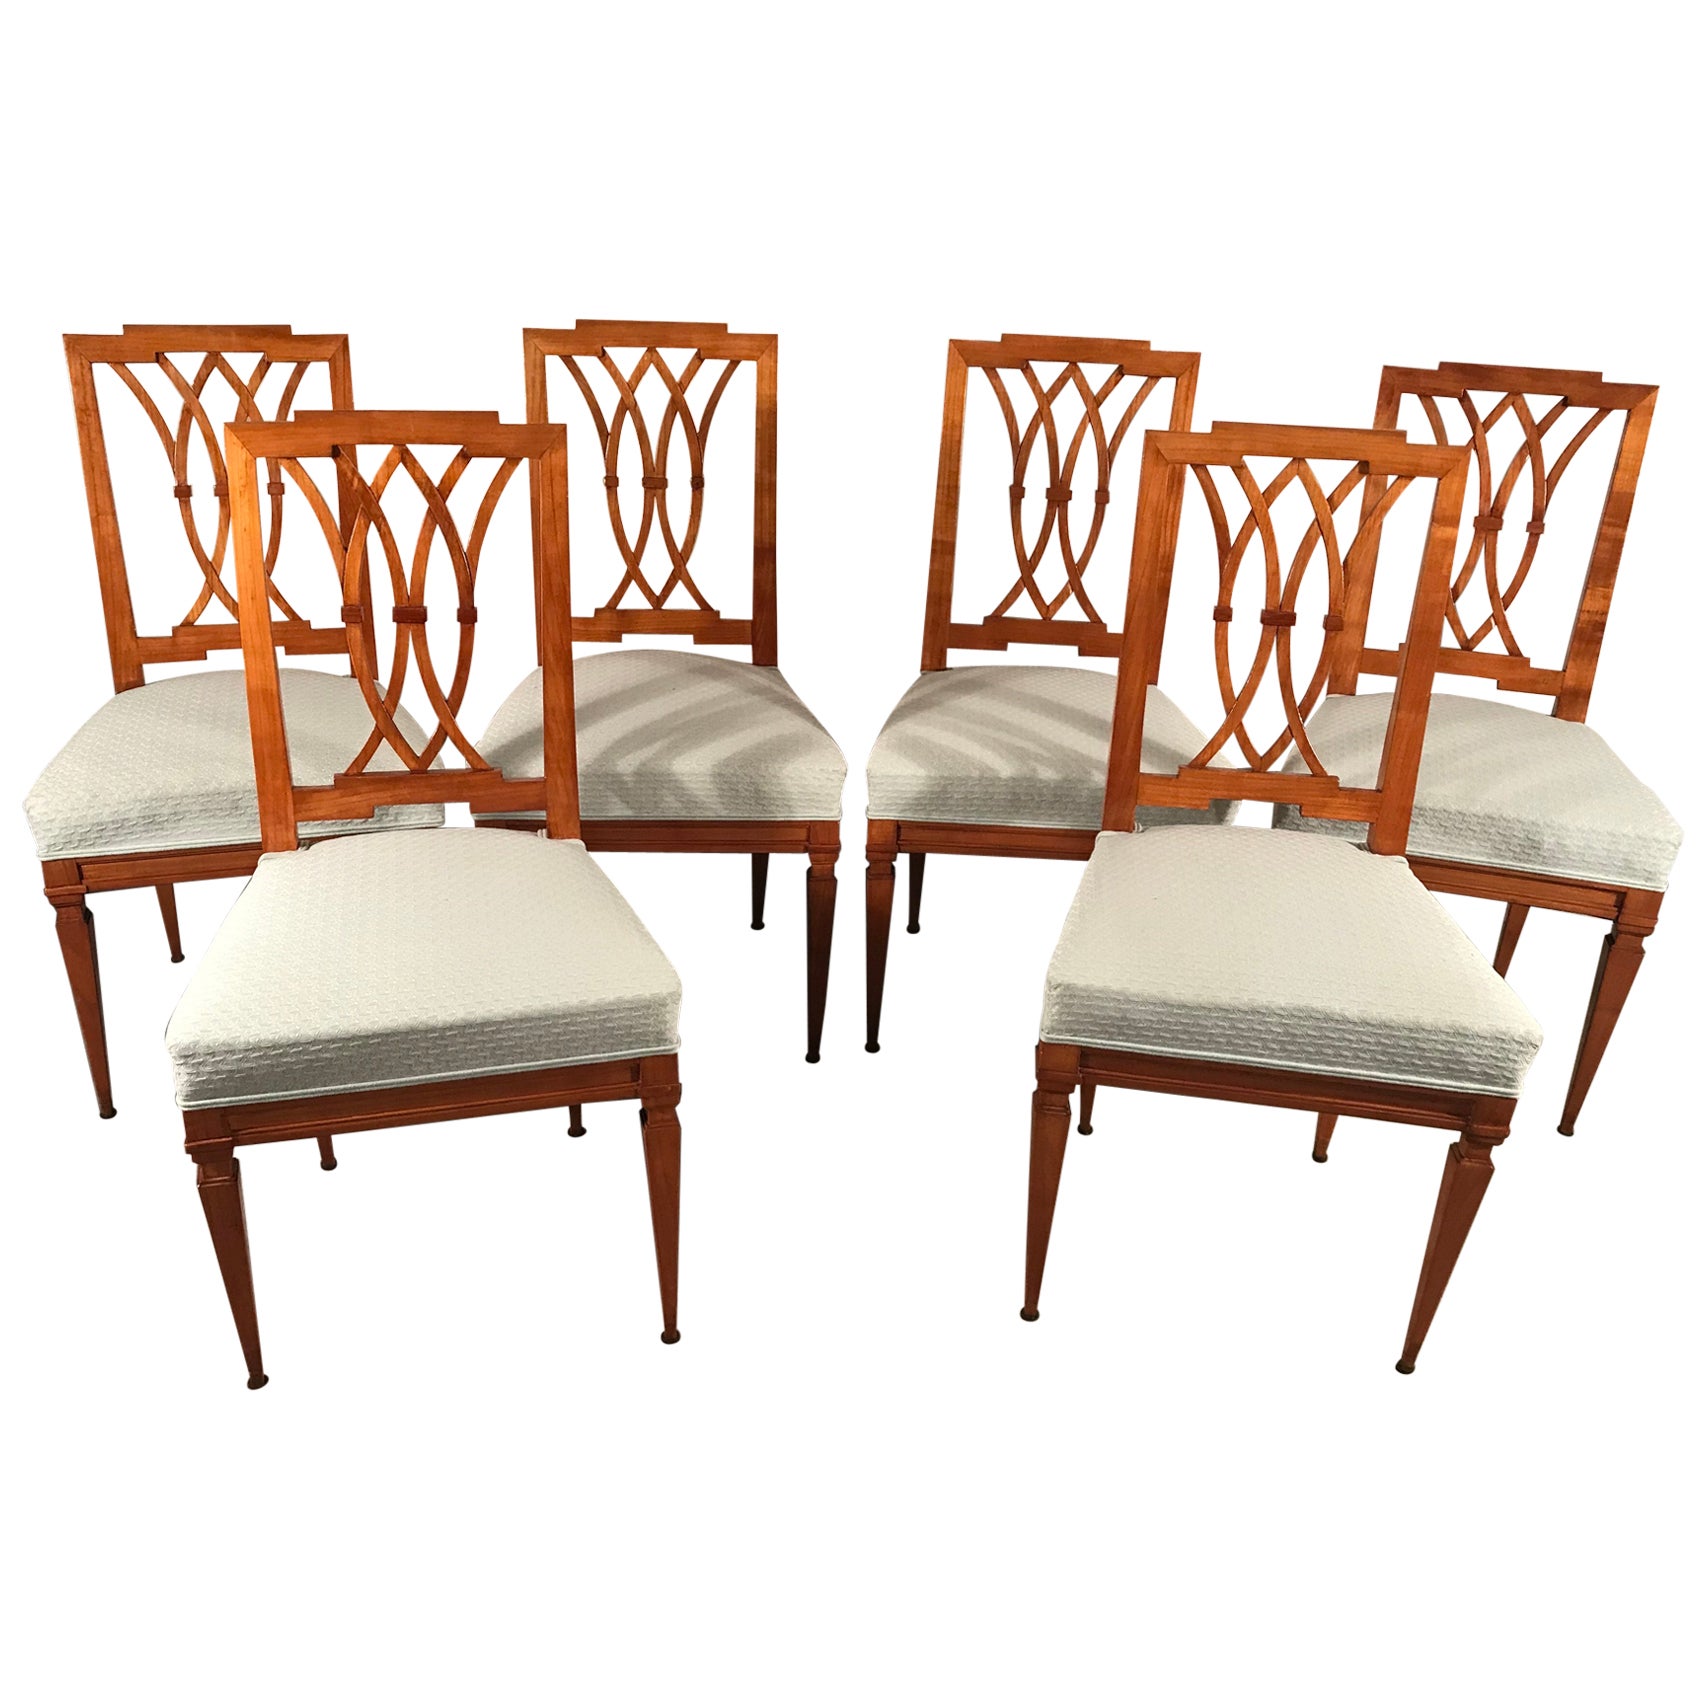 Set of Six Neoclassical Chairs, Germany around 1810 For Sale